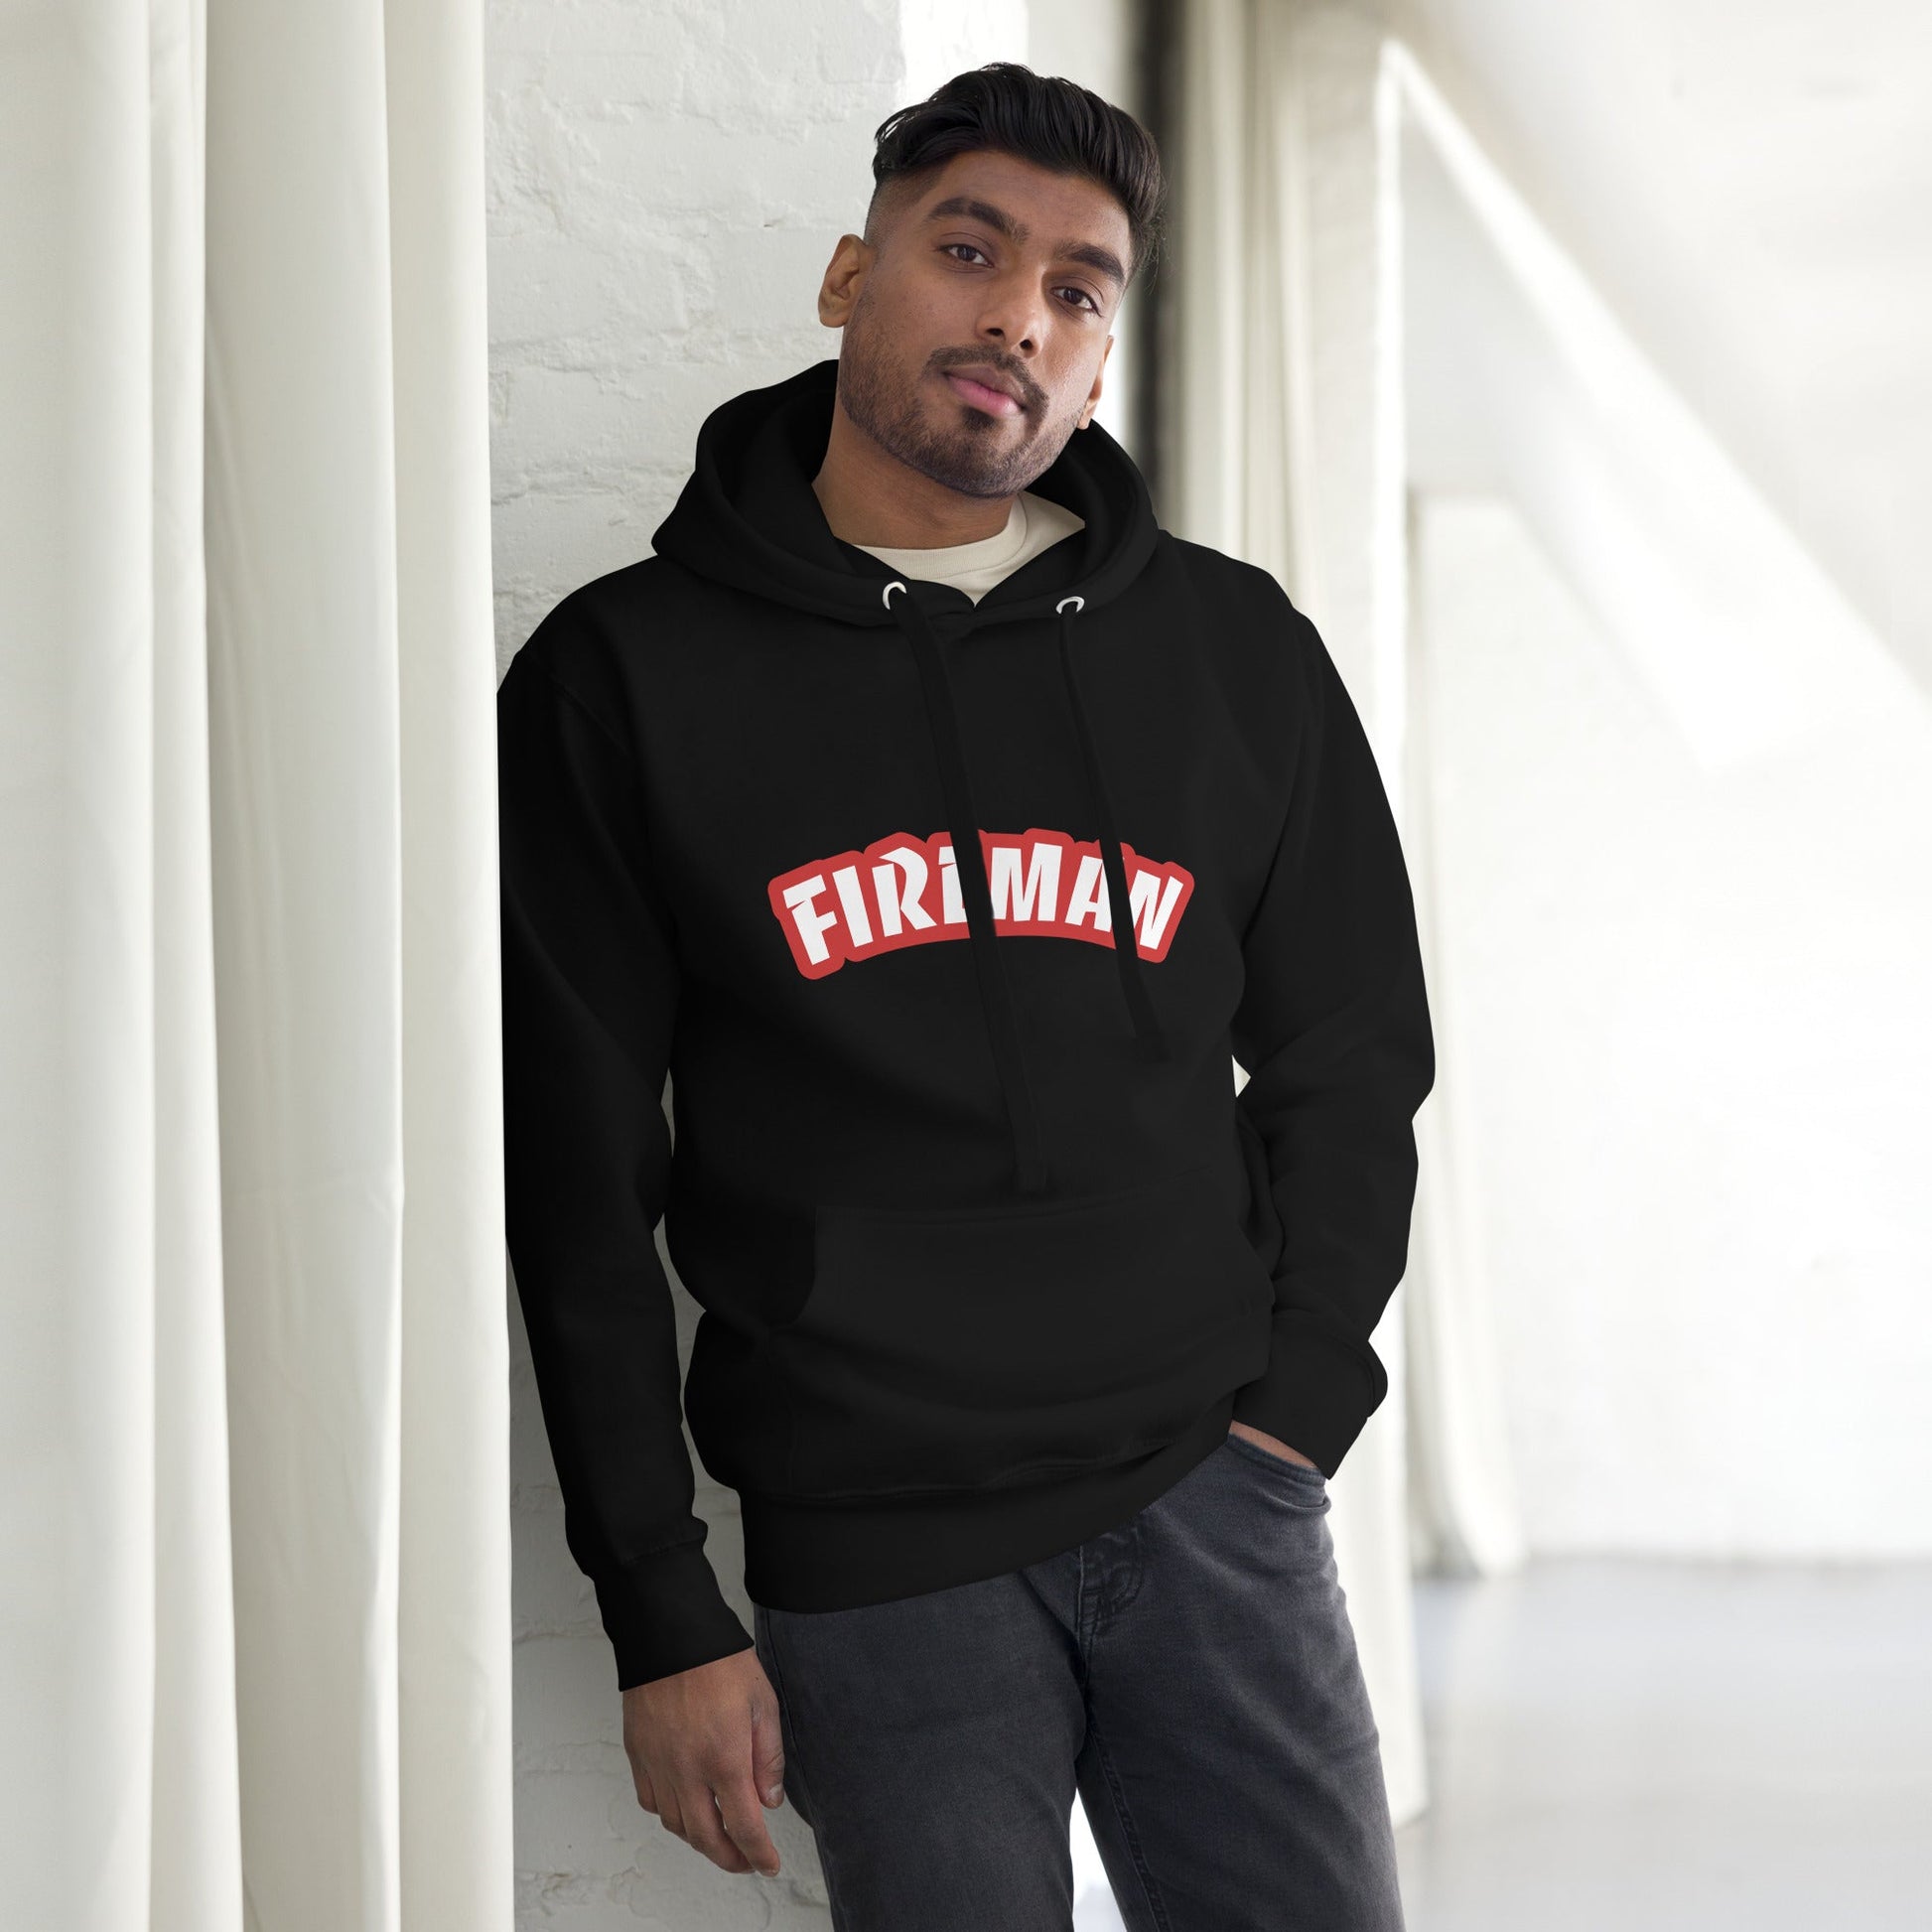 Man wearing Black hoodie with Fireman text on white canvas background